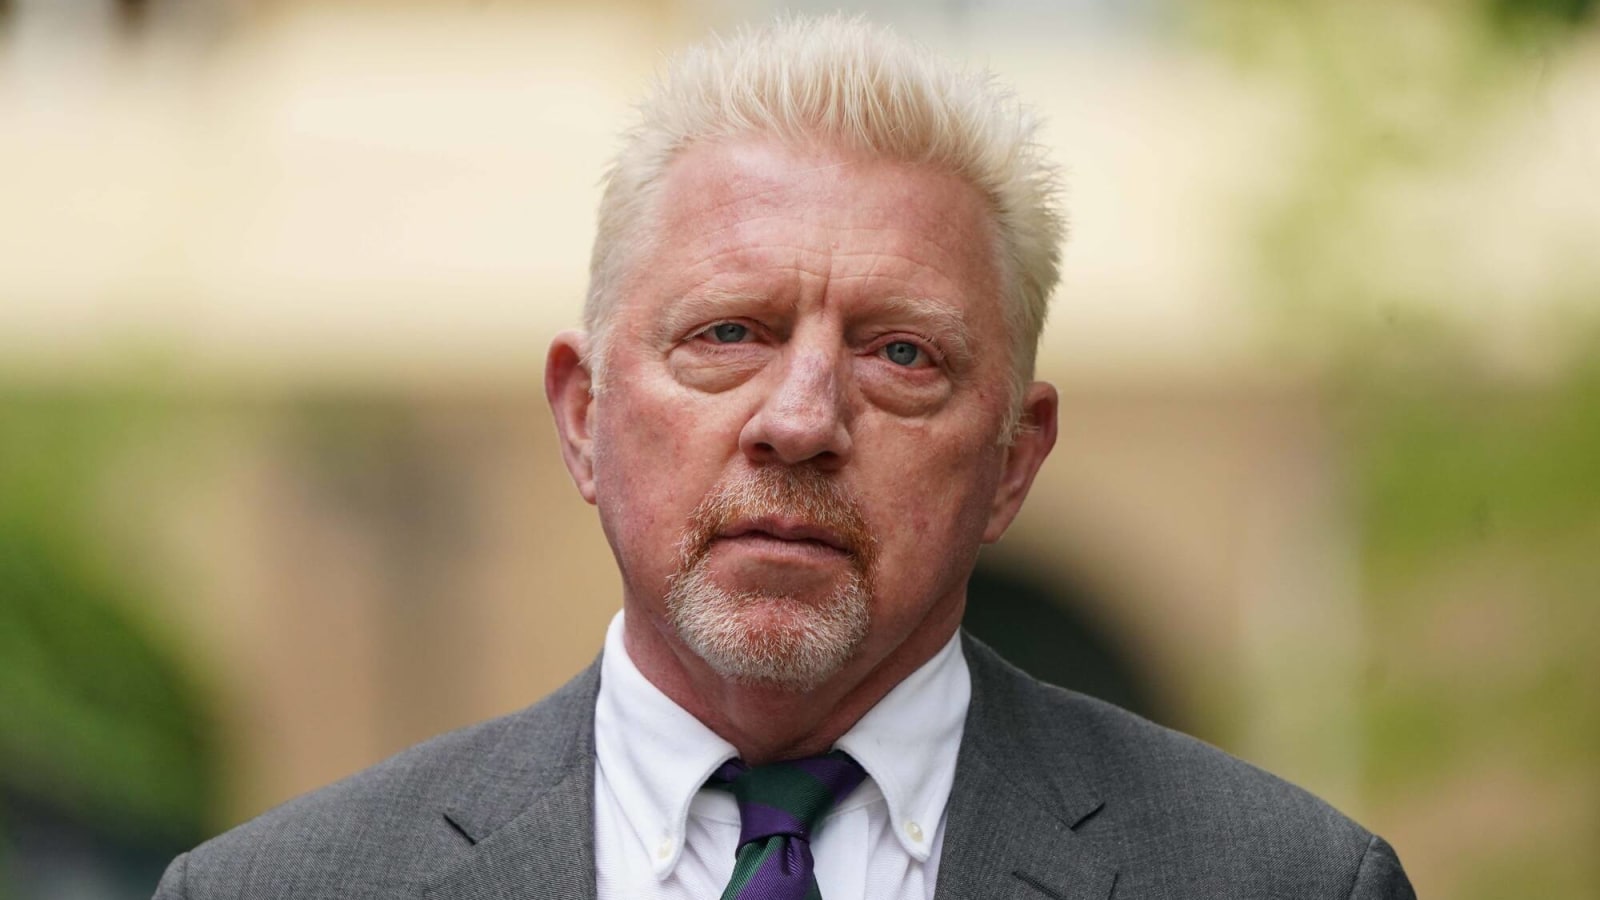 Boris Becker looks ahead to ‘dream’ Australian Open final: ‘Either way, tennis history will be made’